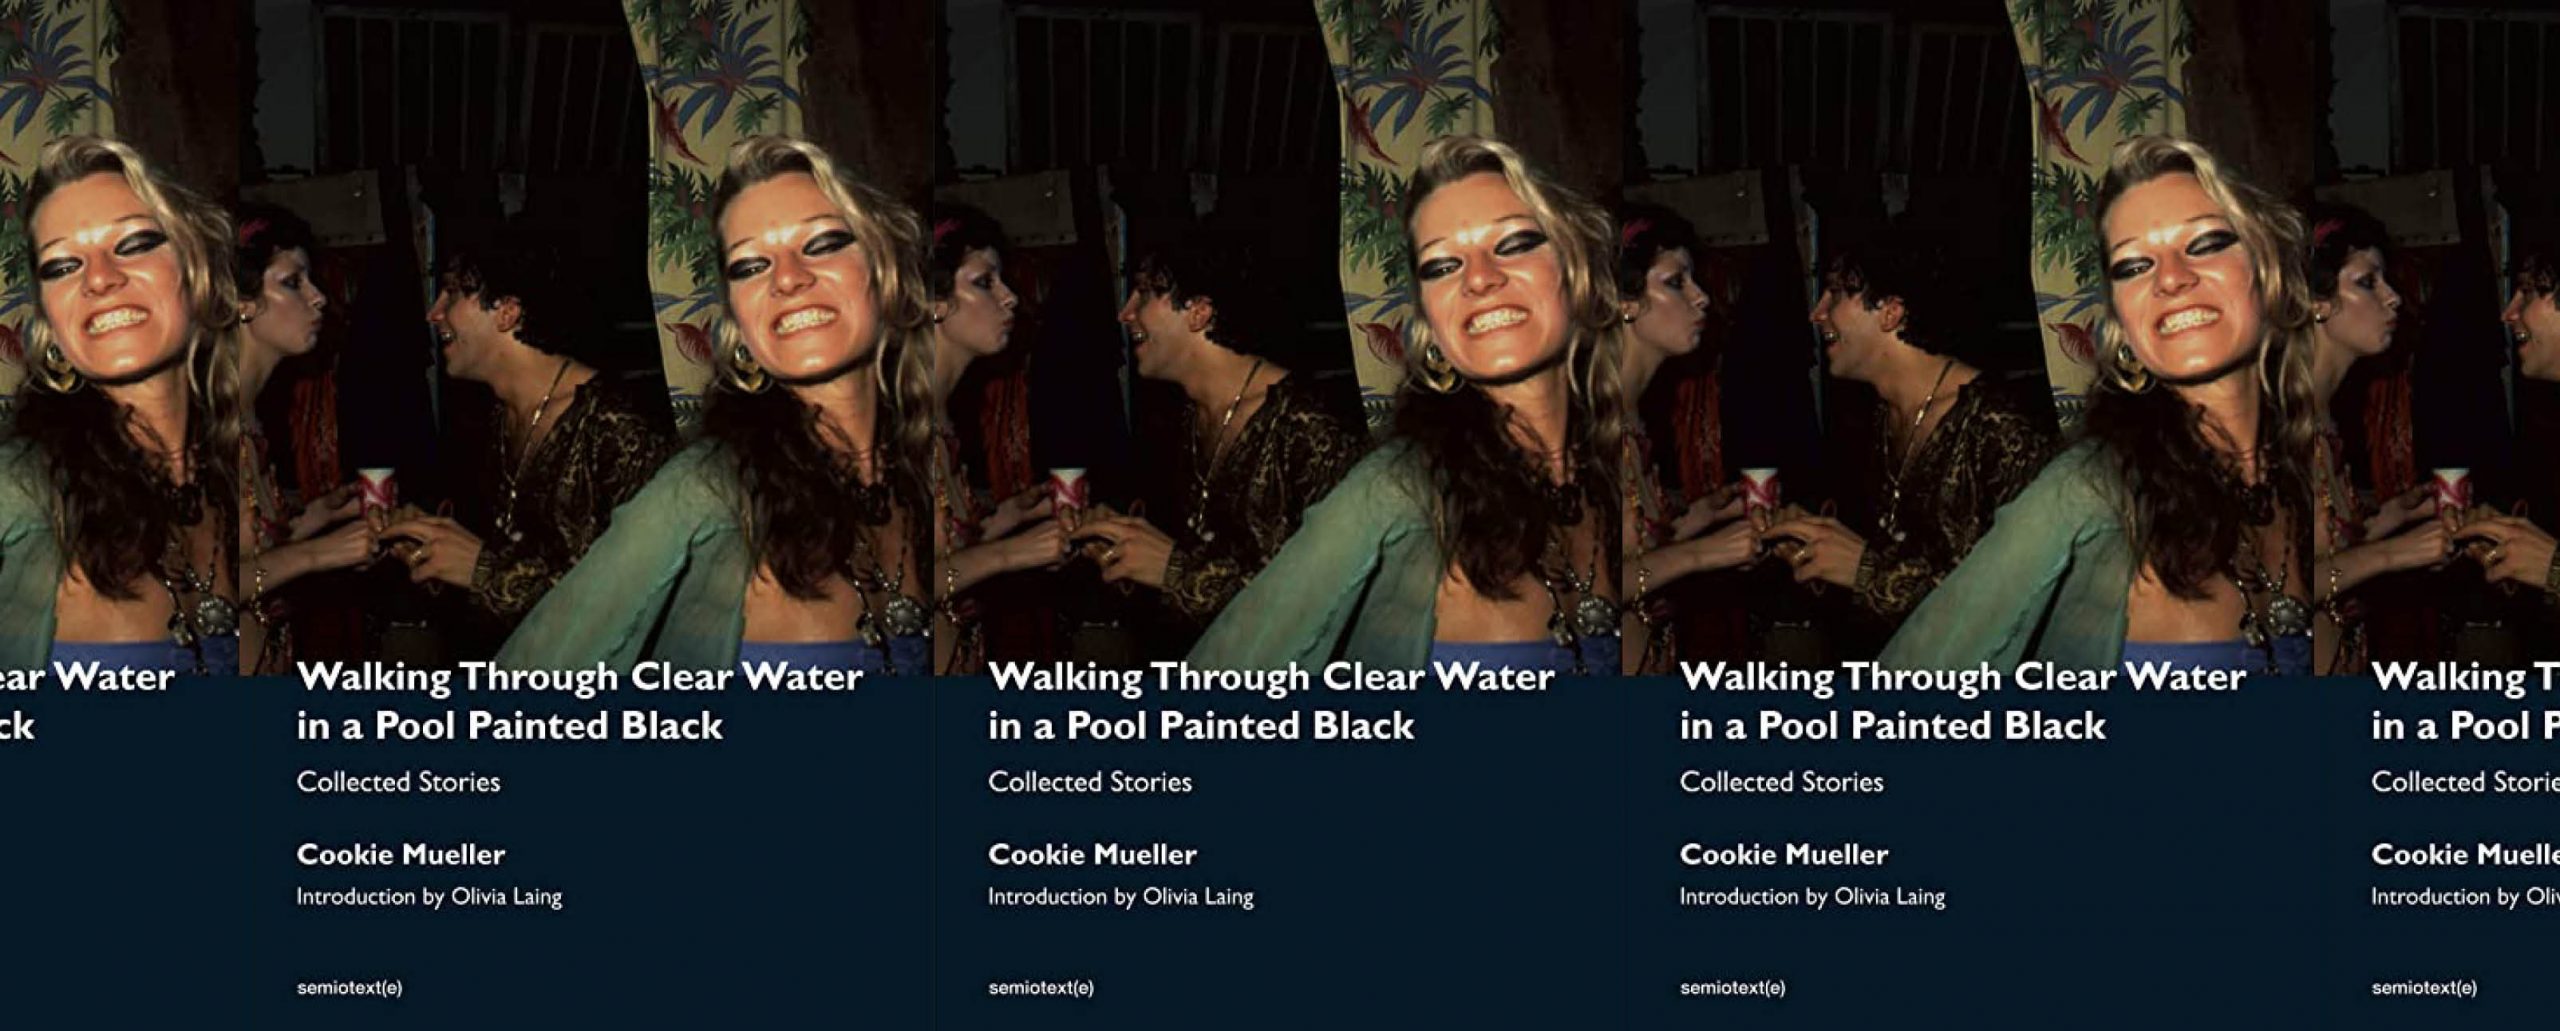 the book cover for Walking Through Clear Water in a Pool Painted Black